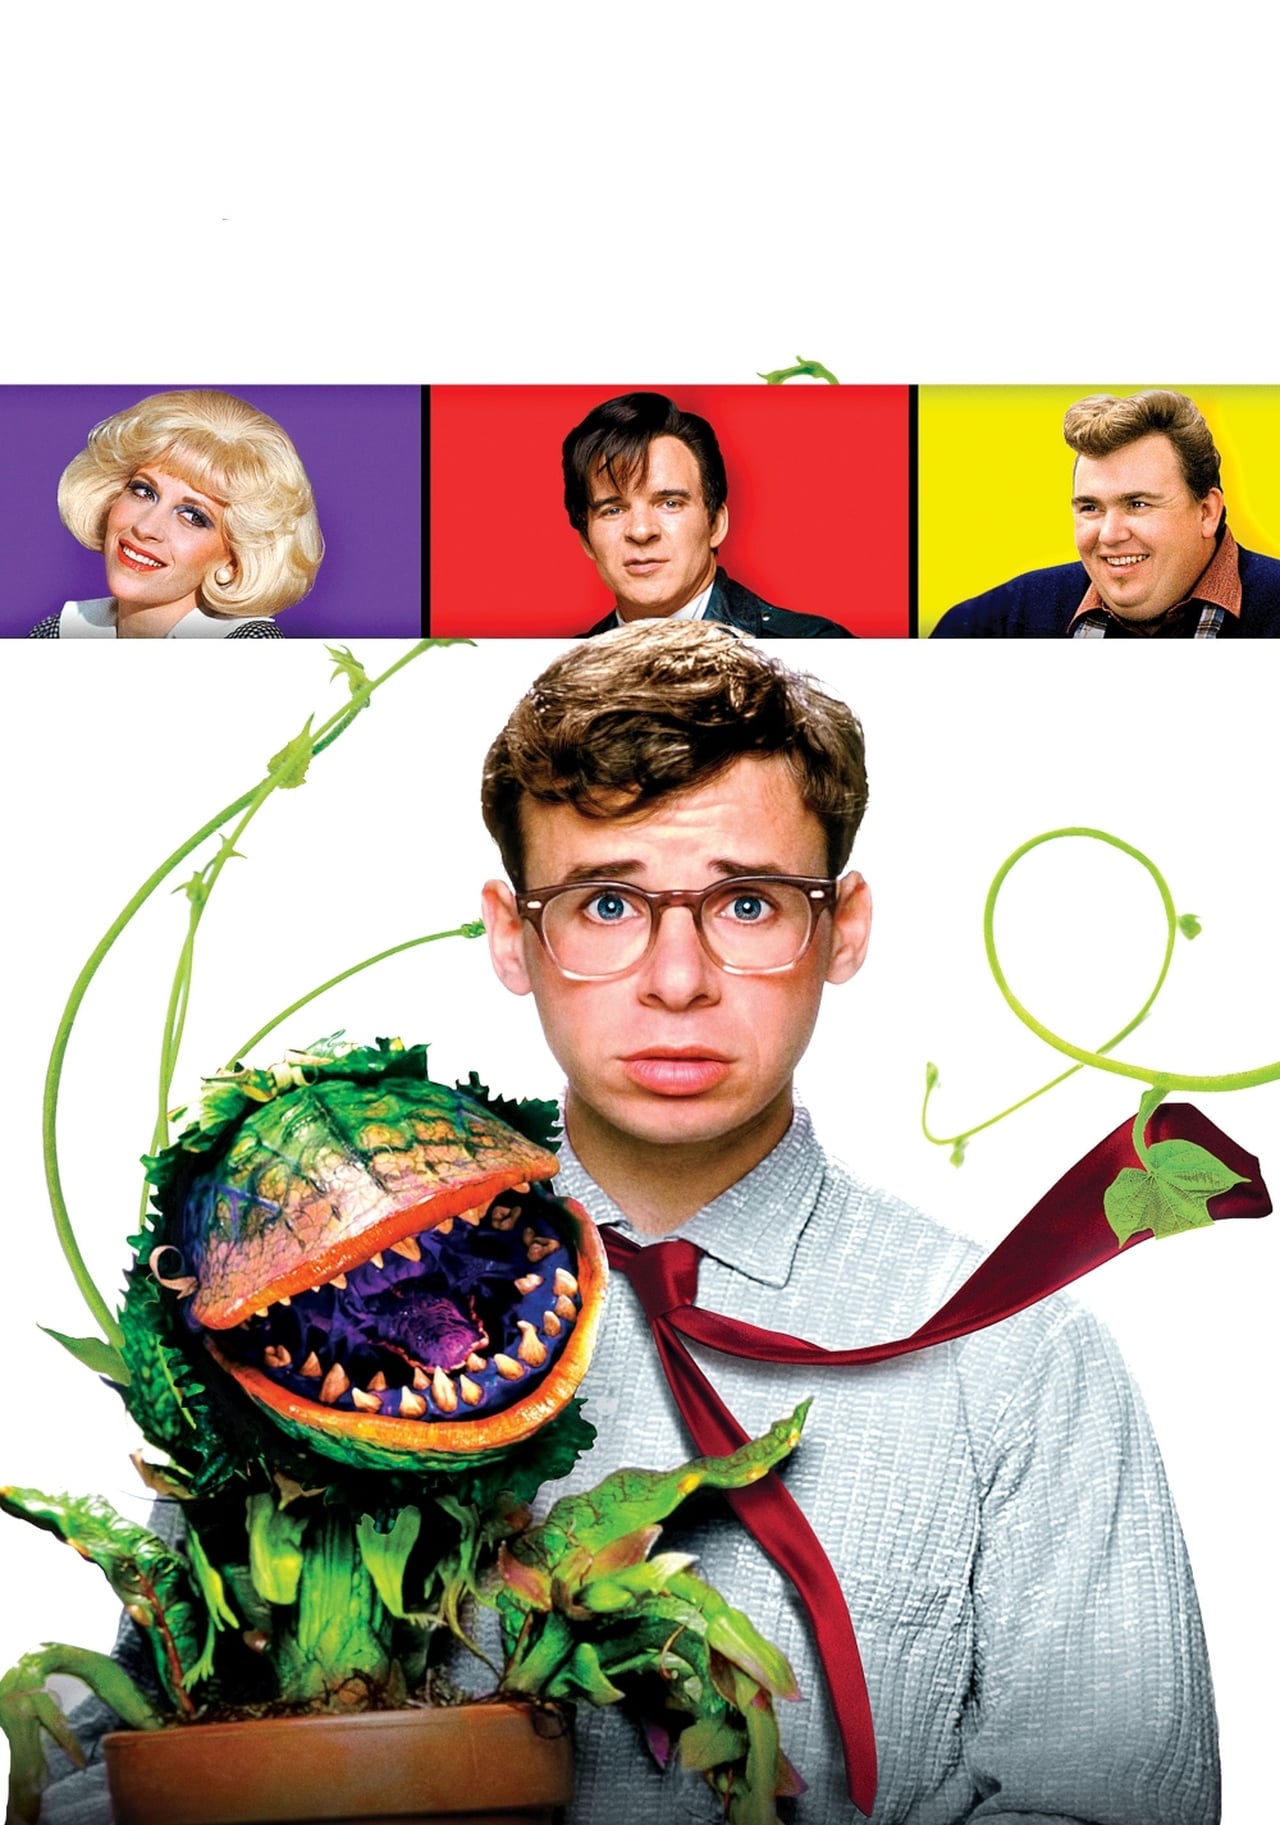 Little Shop of Horrors (1986) Movie Synopsis, Summary, Plot & Film Details